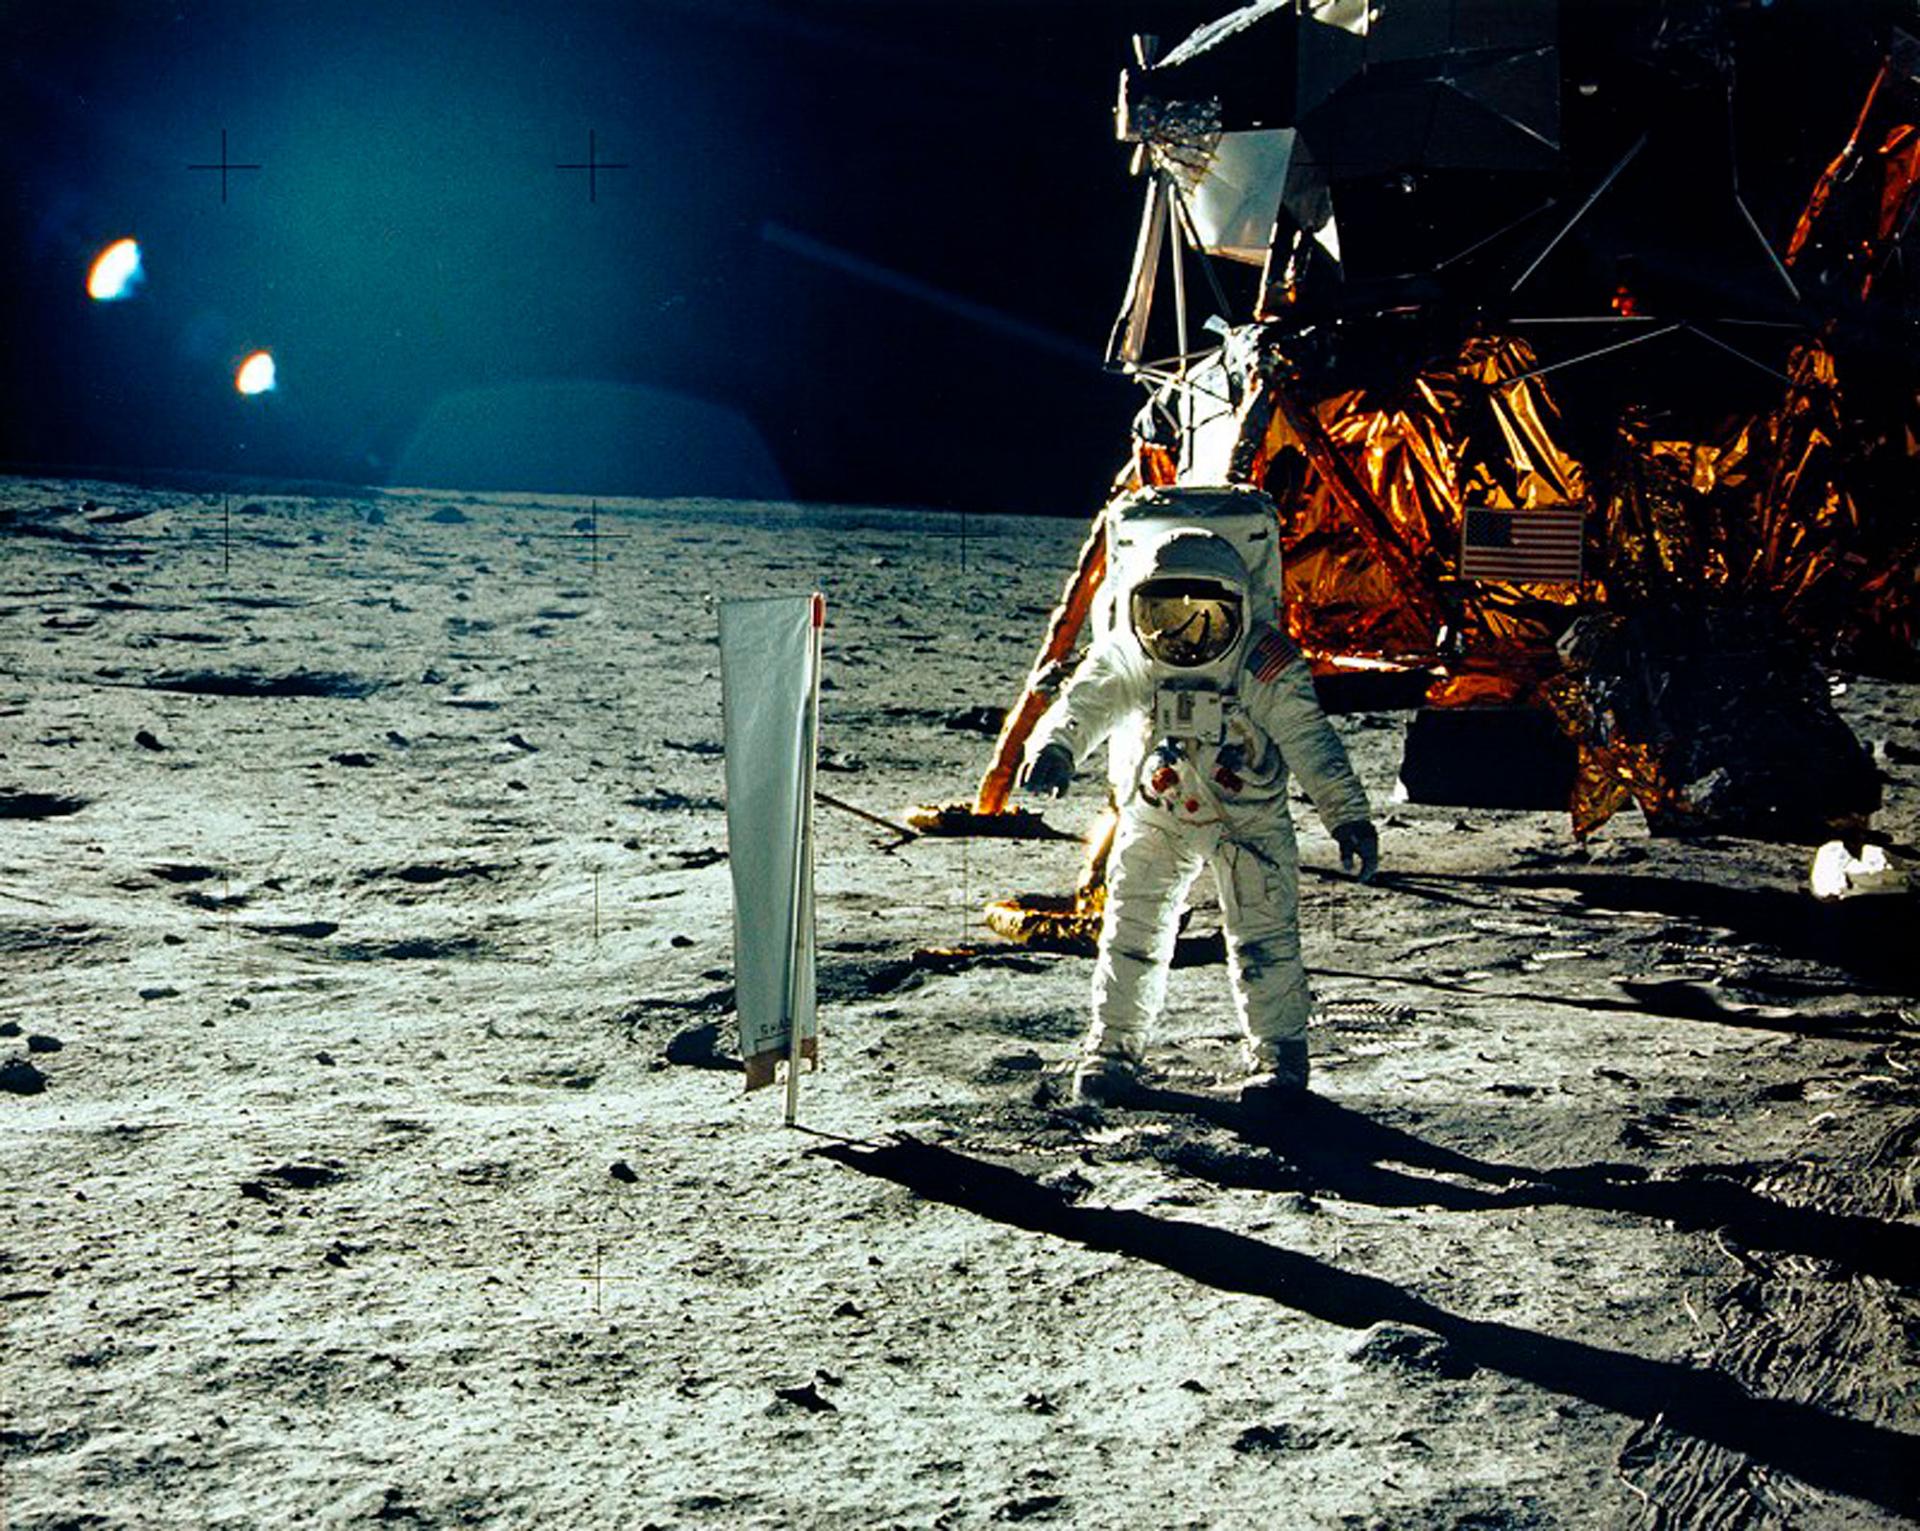 An astraunant is show in full protective gear standing on the surface of the moon.